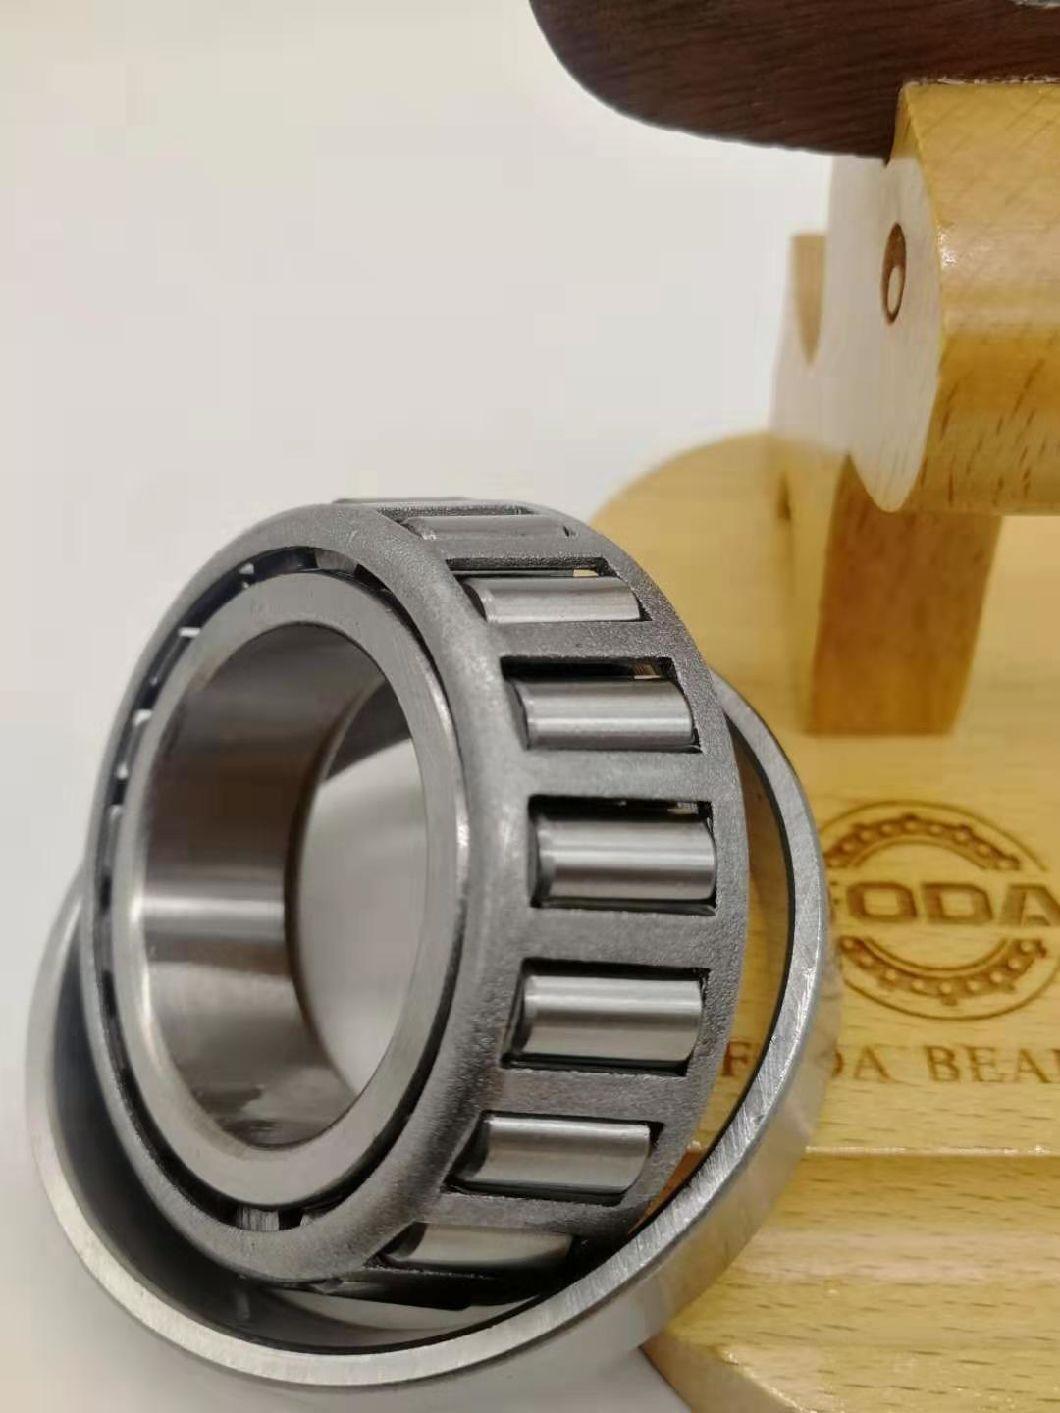 British Non-Standard Taper Roller Bearing 68149/10 Used on Auto (67048/10 11949/10 68149/10 12749/10 48548/10 12649/10 102949/10 32228 32216 32226 32224 32230)